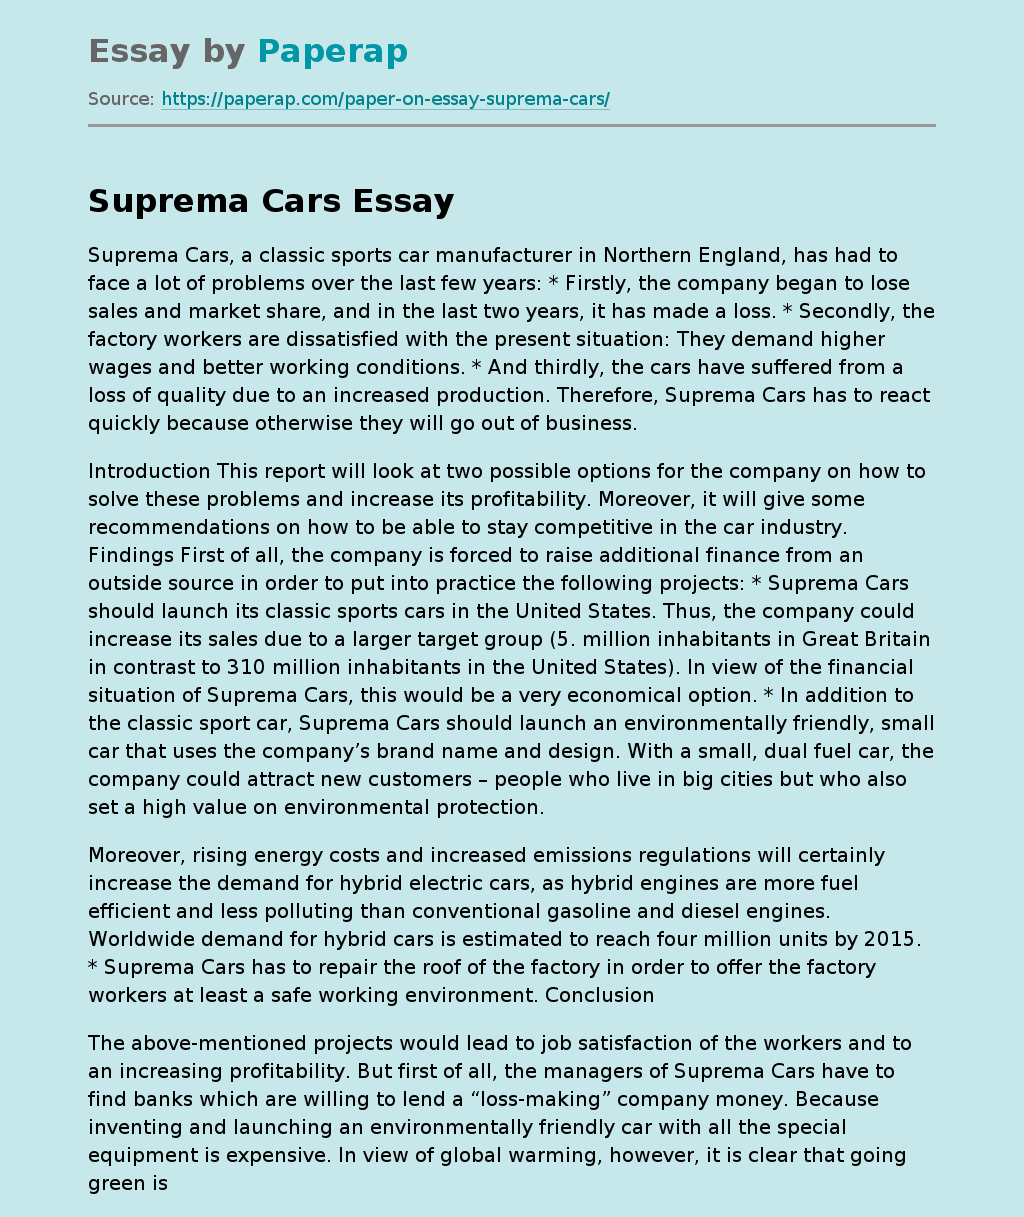 Suprema Cars: Facing Challenges in Northern England